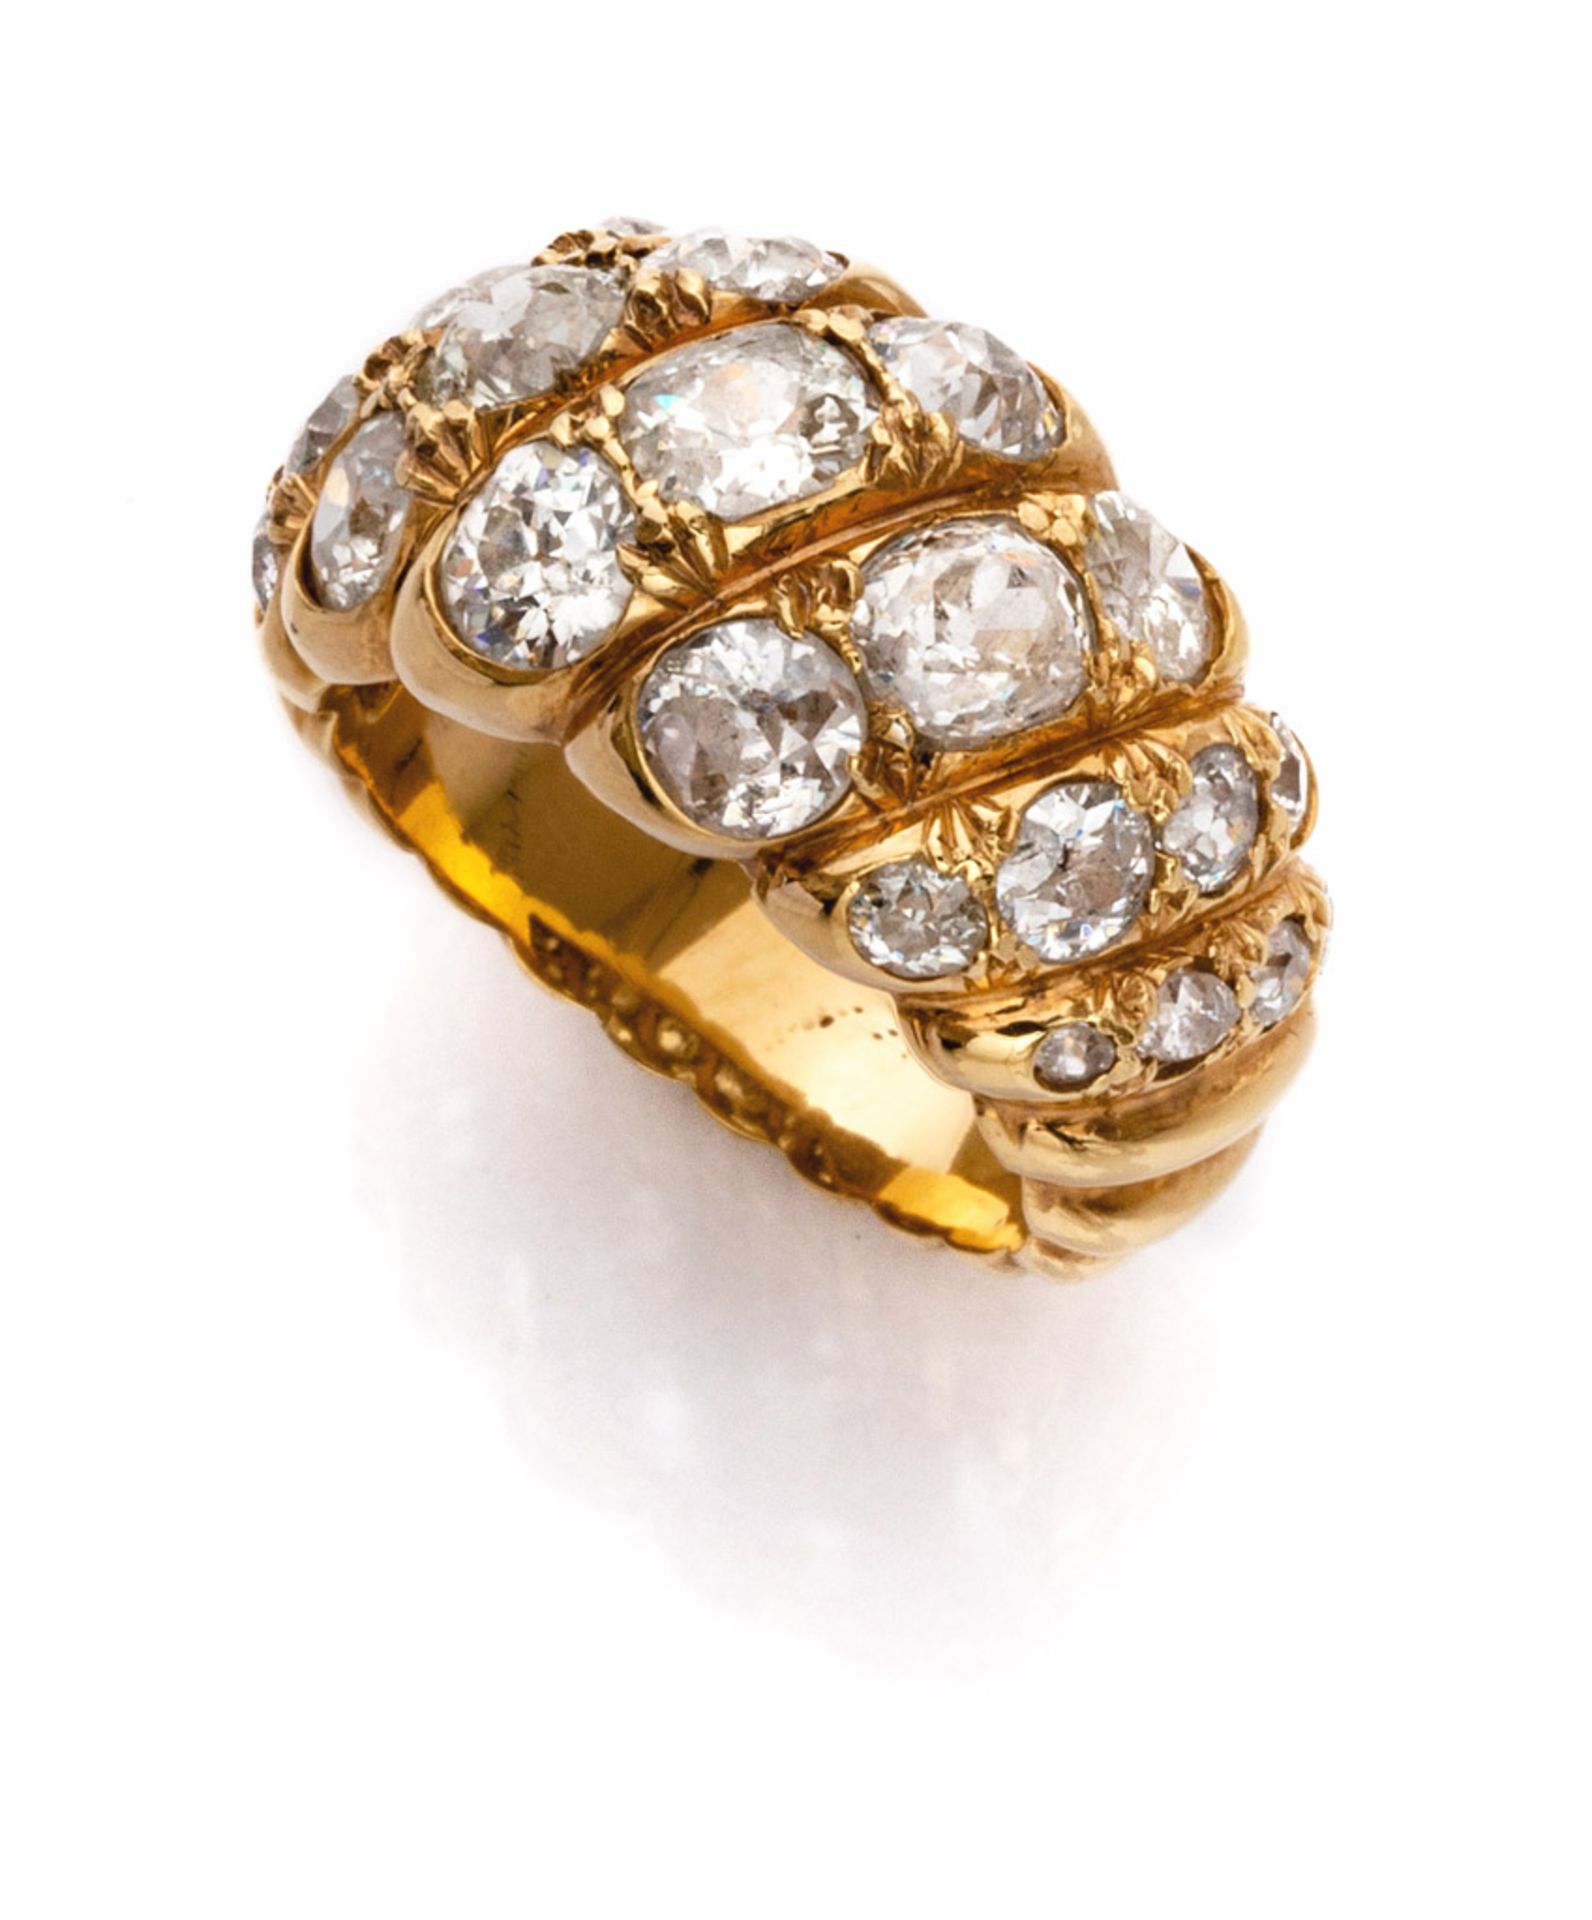 RING in yellow gold 18 kts., twisted band with antique cut diamonds. Diamonds ct. 2.80 ca., total